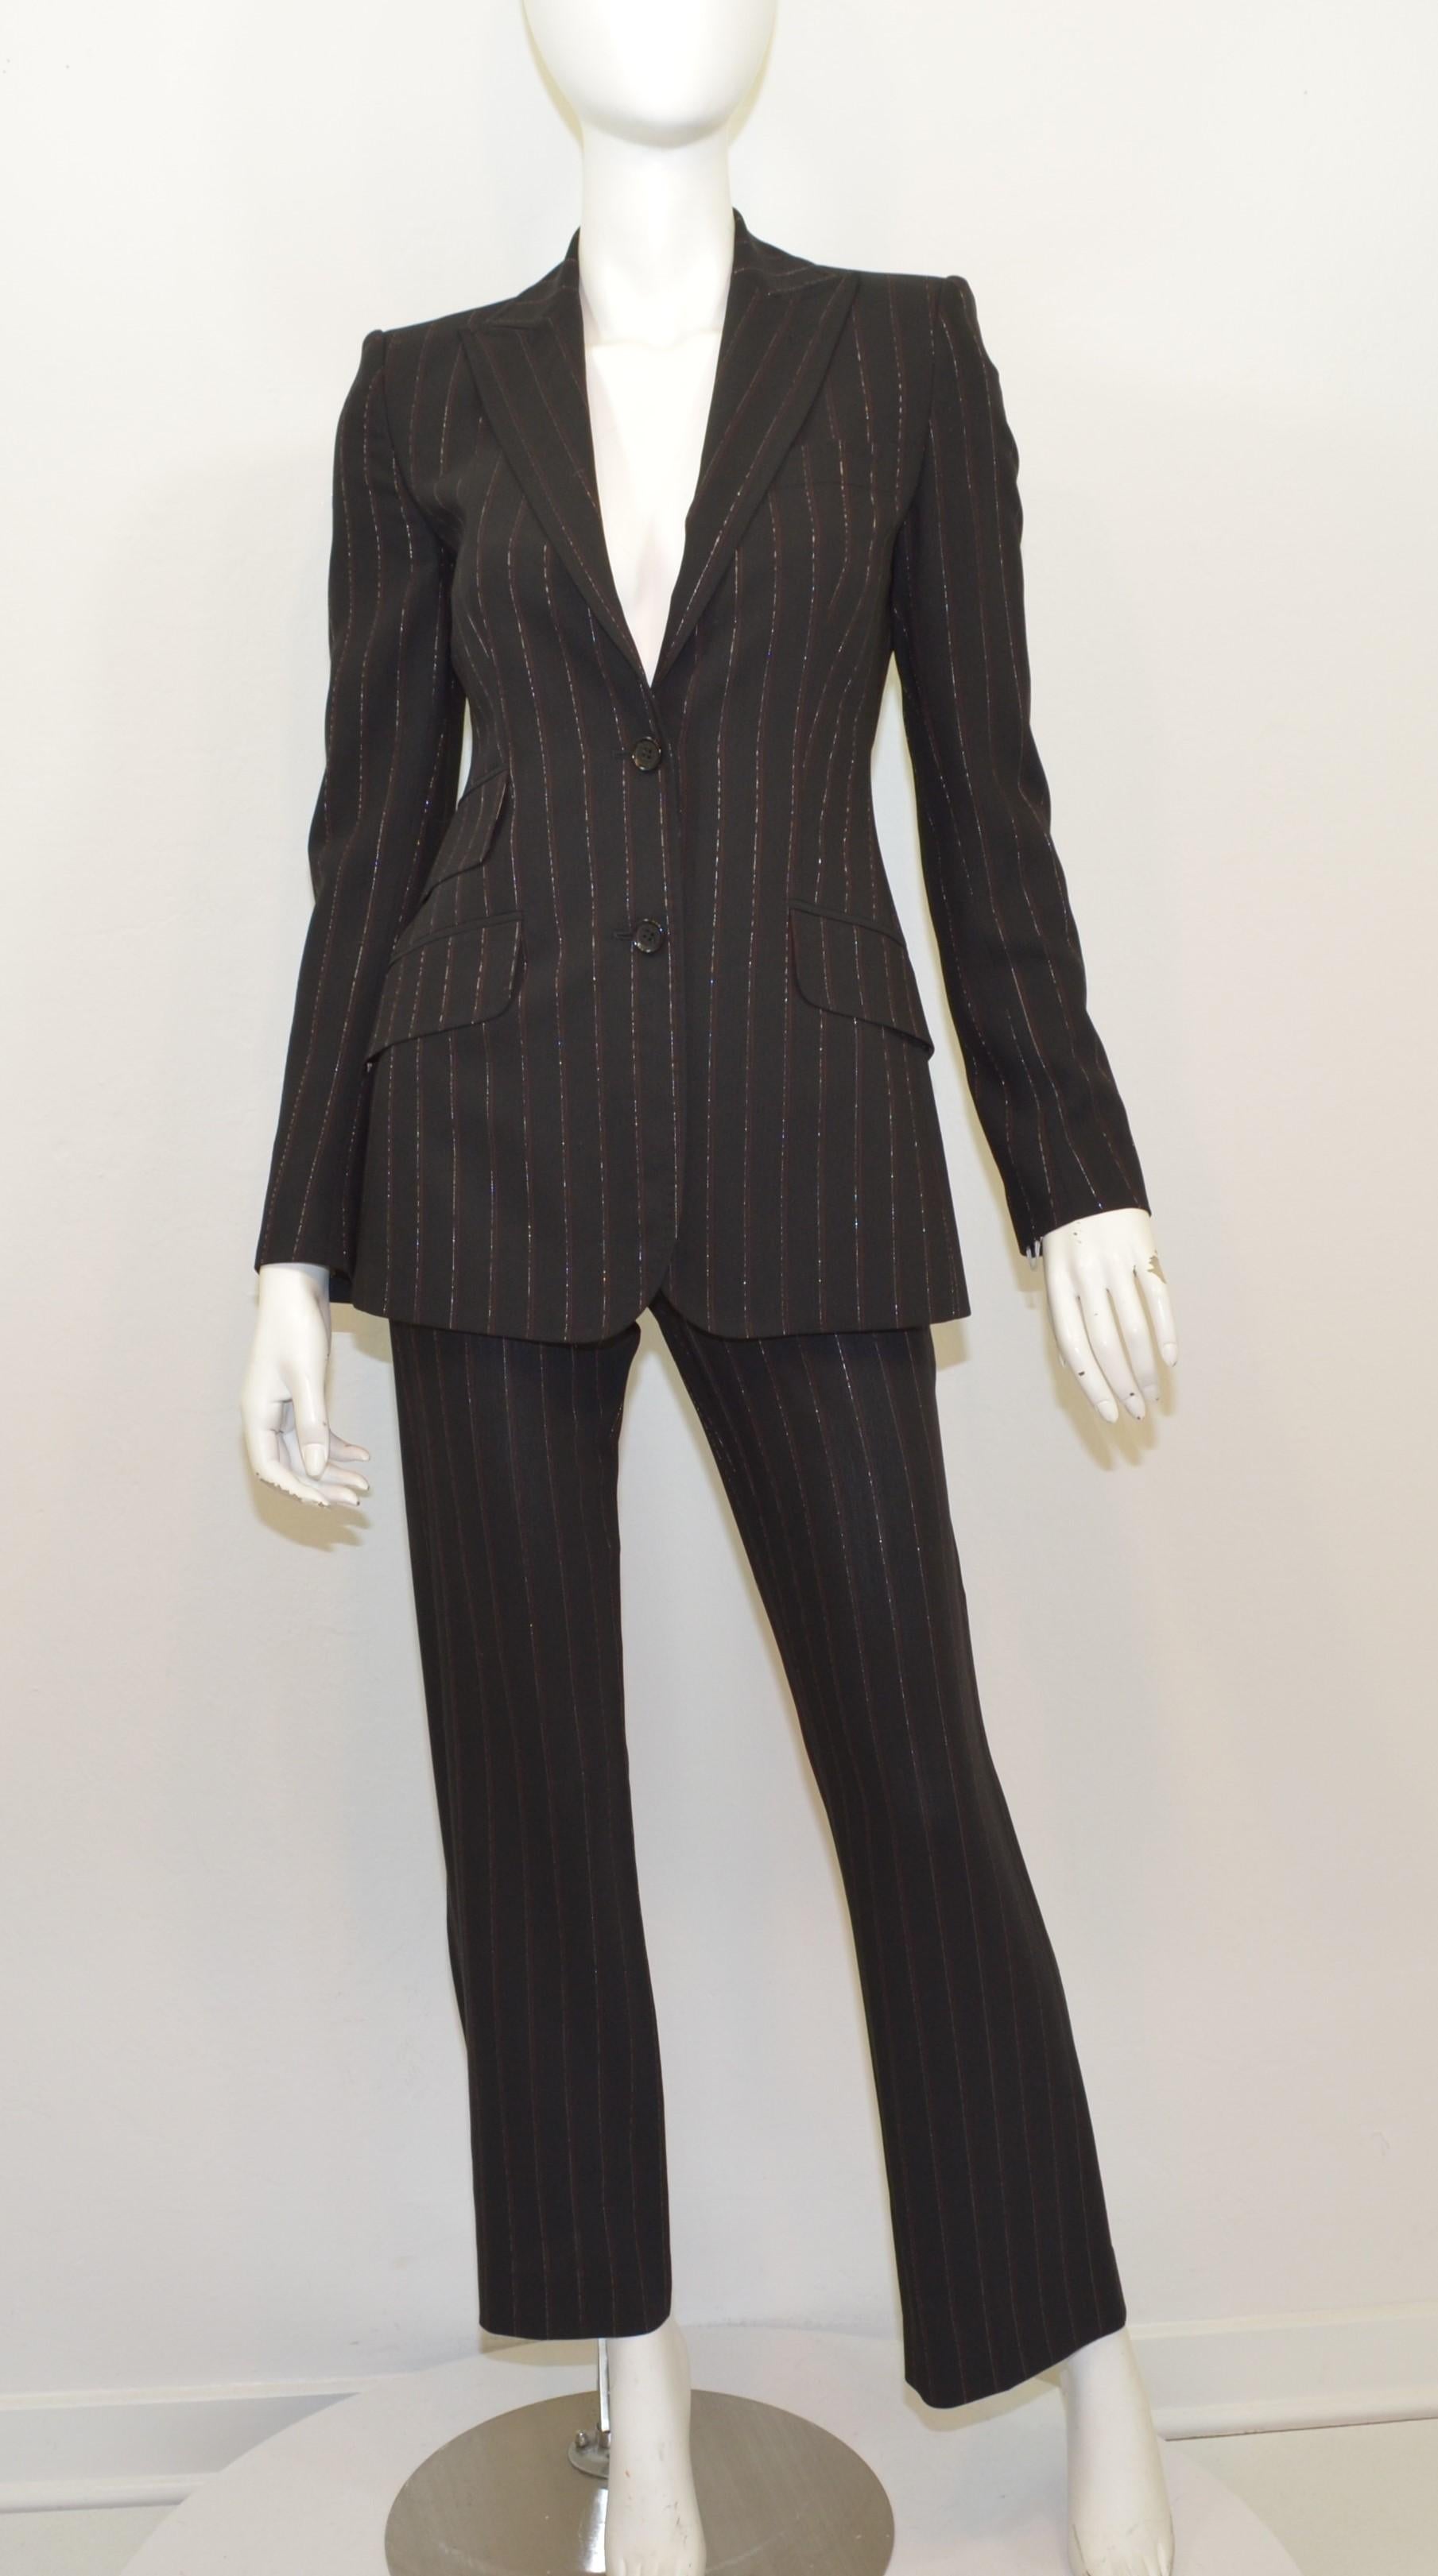 Dolce & Gabbana Black Pinstriped Jacket and Pants Suit Set -- featured in black with silver and red metallic pinstripes throughout. Jacket has button fastenings and three flap pockets. Pants have a button and zipper fastening. Made in Italy, labeled